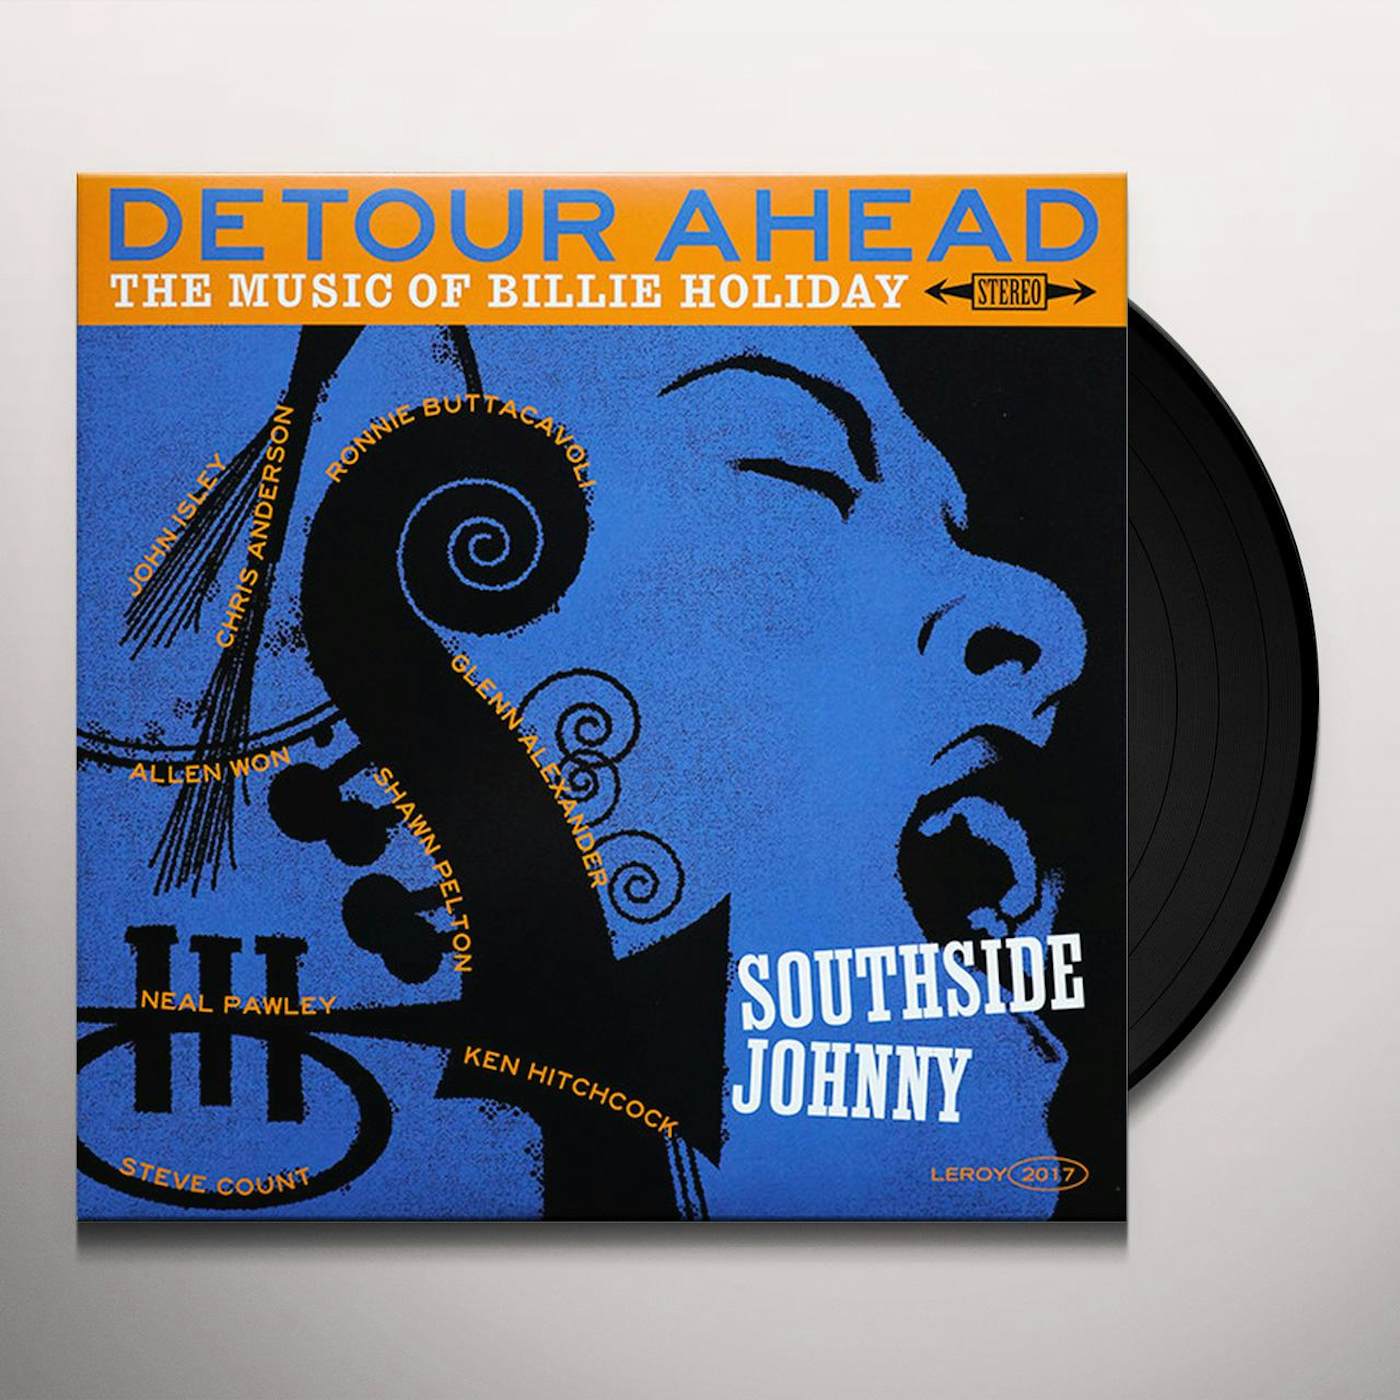 Southside Johnny And The Asbury Jukes DETOUR AHEAD: MUSIC OF BILLIE HOLIDAY Vinyl Record